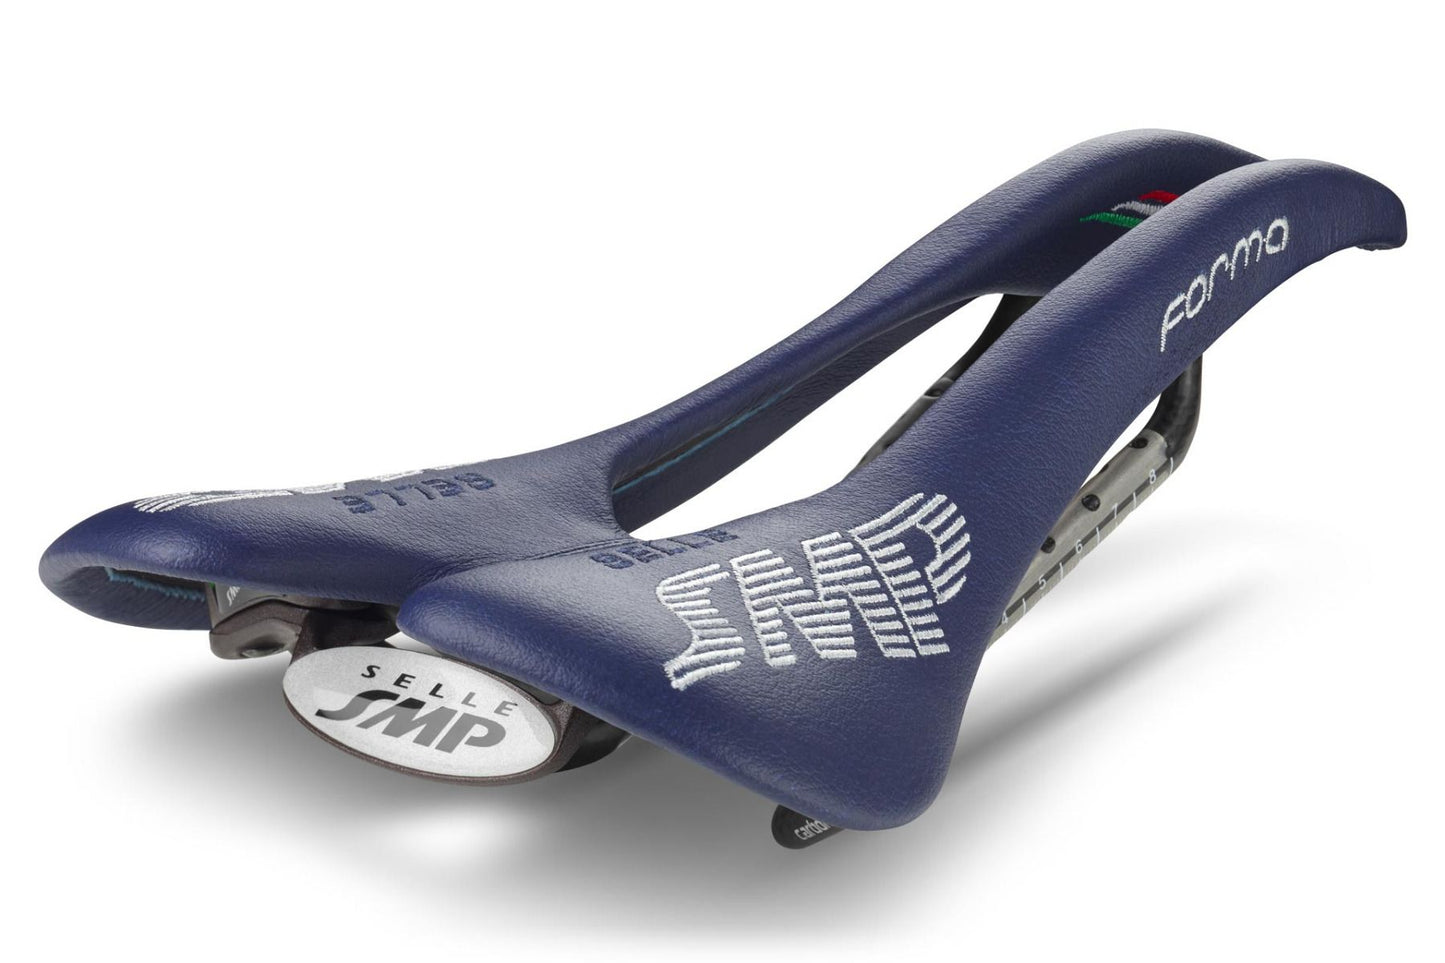 Selle SMP Forma Saddle with Carbon Rails (Blue)